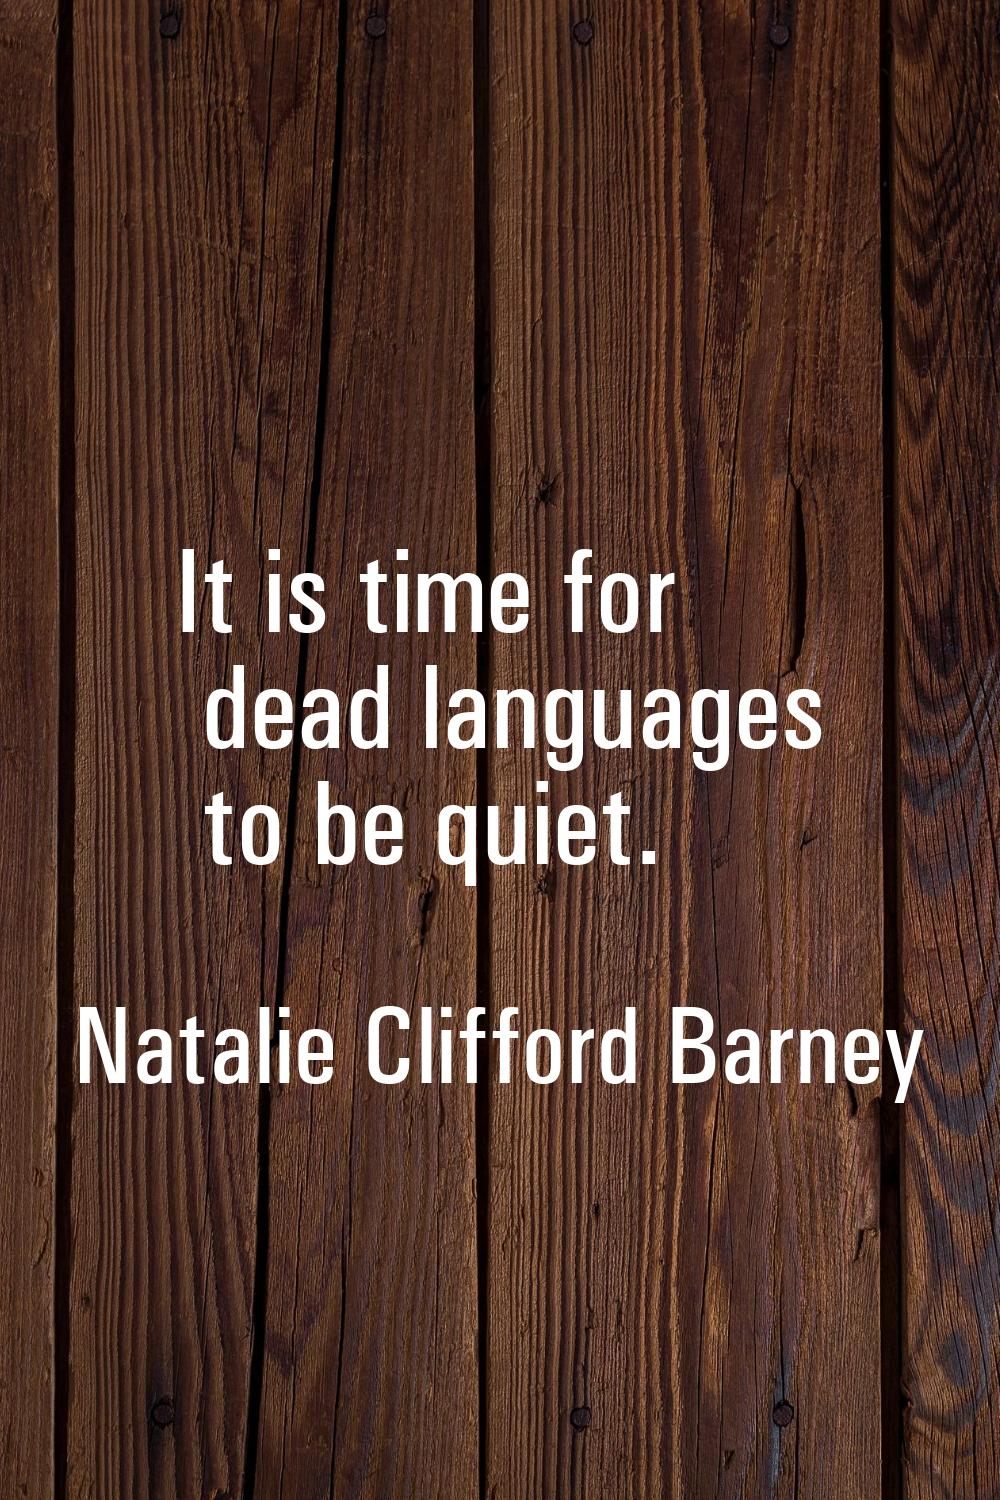 It is time for dead languages to be quiet.